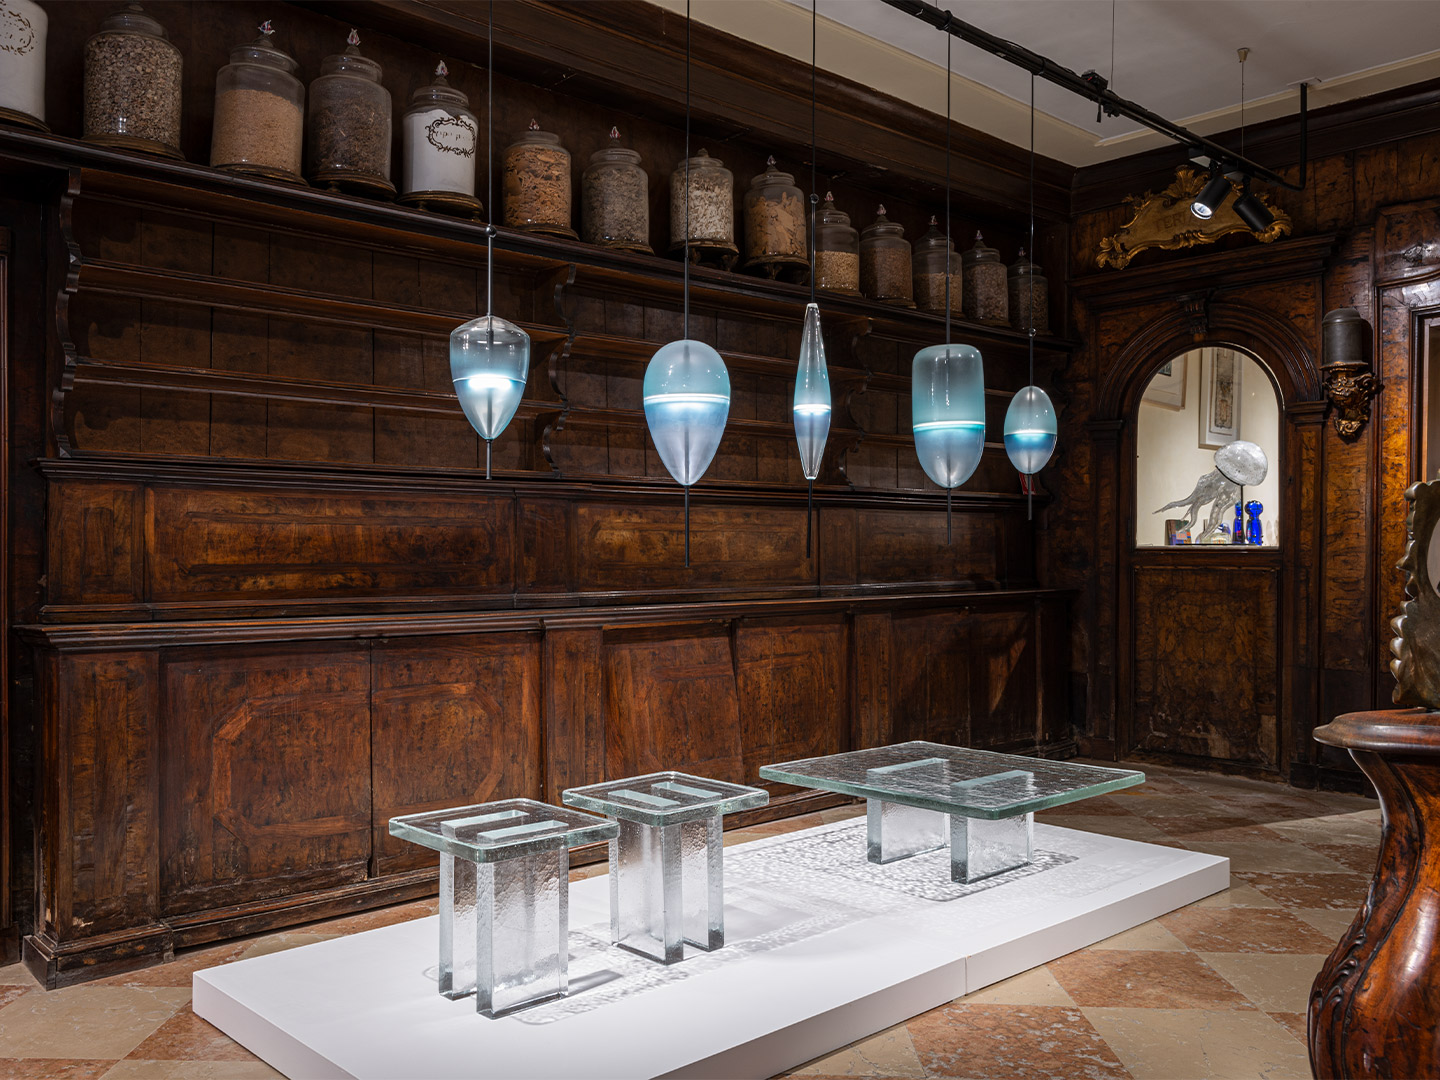 Glass to Glass exhibition in Italy (Murano and Venice) by WonderGlass and Berengo Studio 